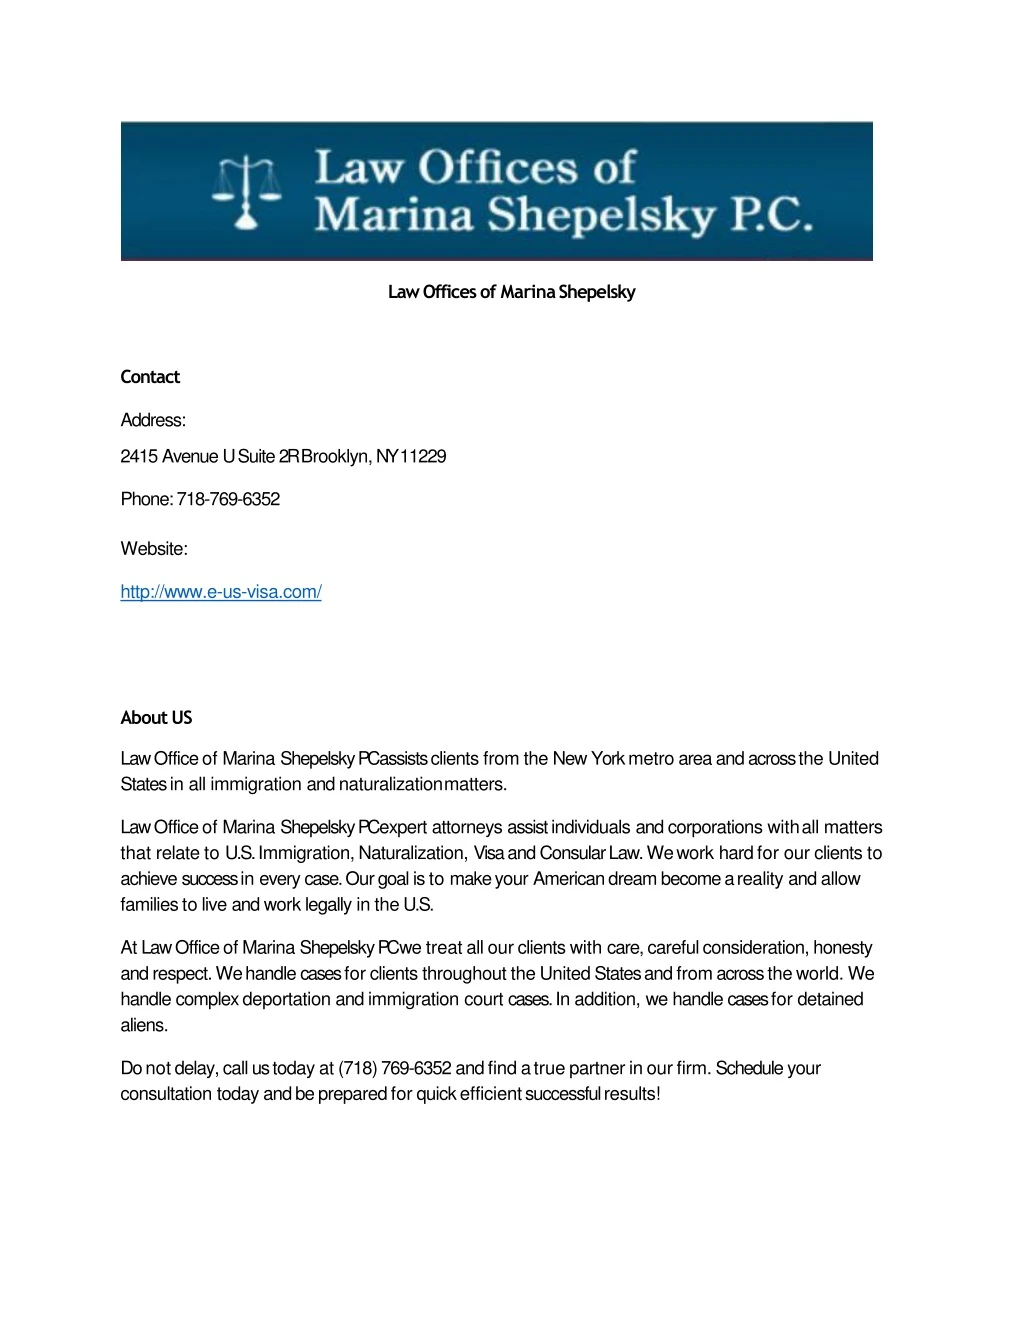 law offices of marina shepelsky